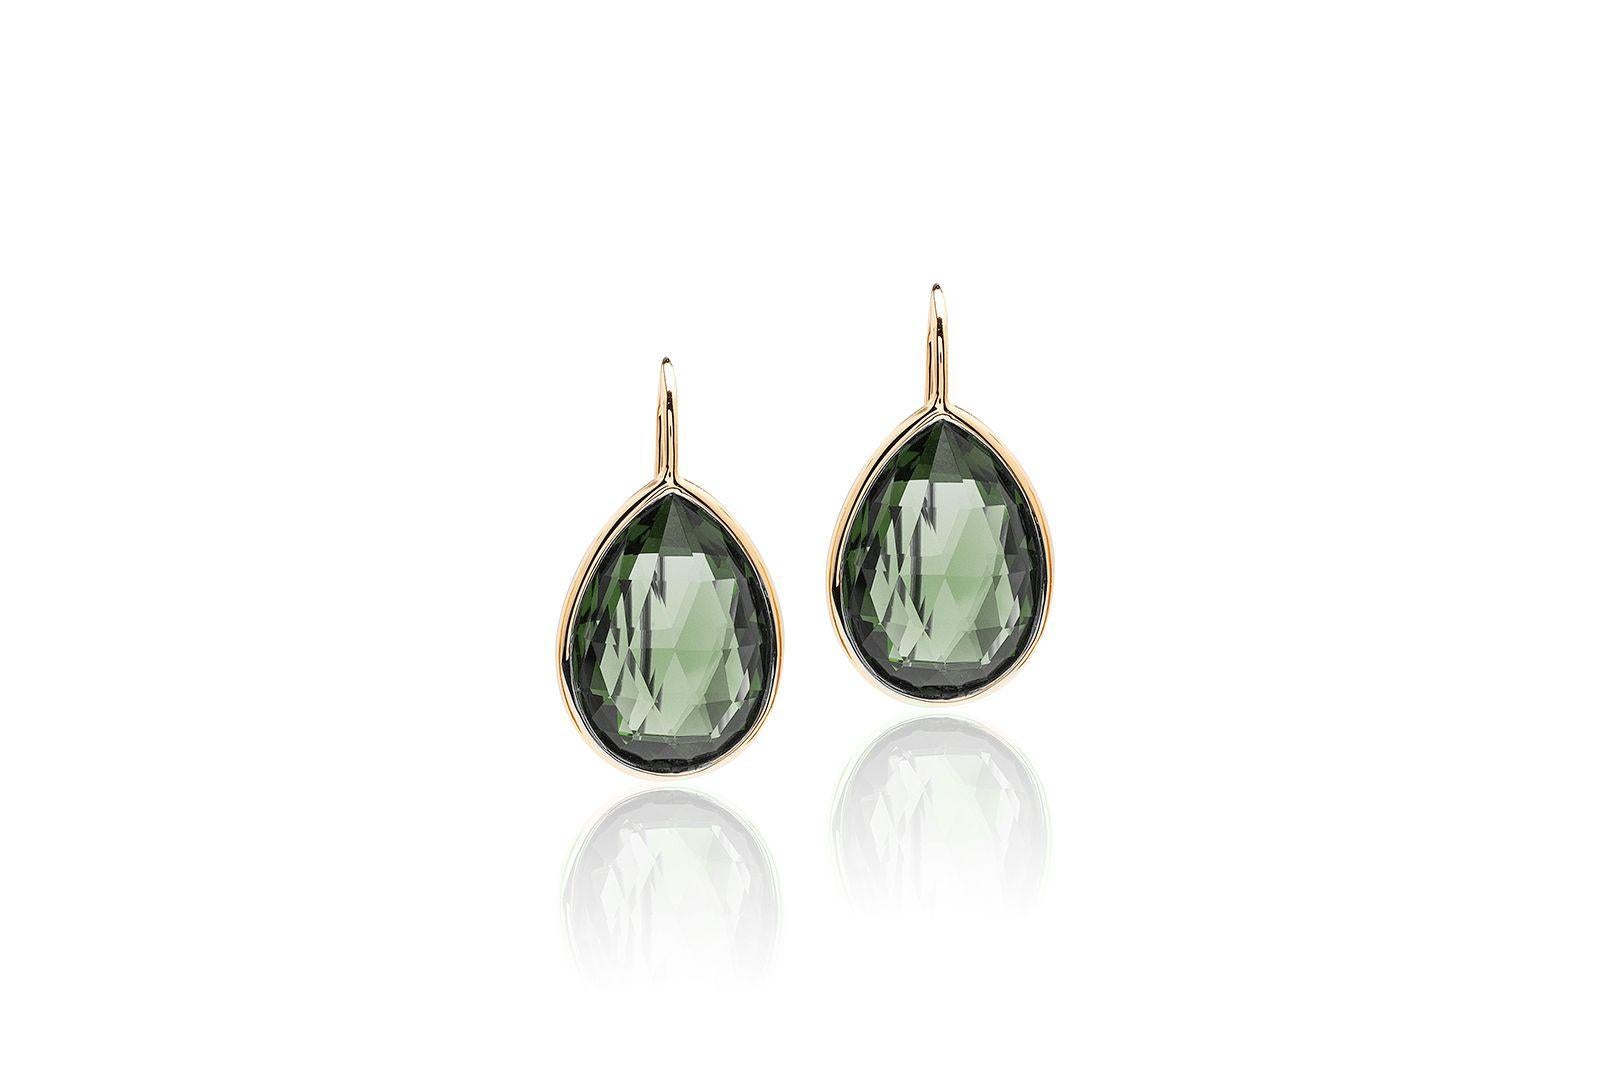 Prasiolite Pear Shape Briolette Earrings on Wire in 18K Yellow Gold, from 'Gossip' Collection

Stone Size: 10 x 14 mm 

Gemstone Approx Wt: Rutilated - 10.28 Carats